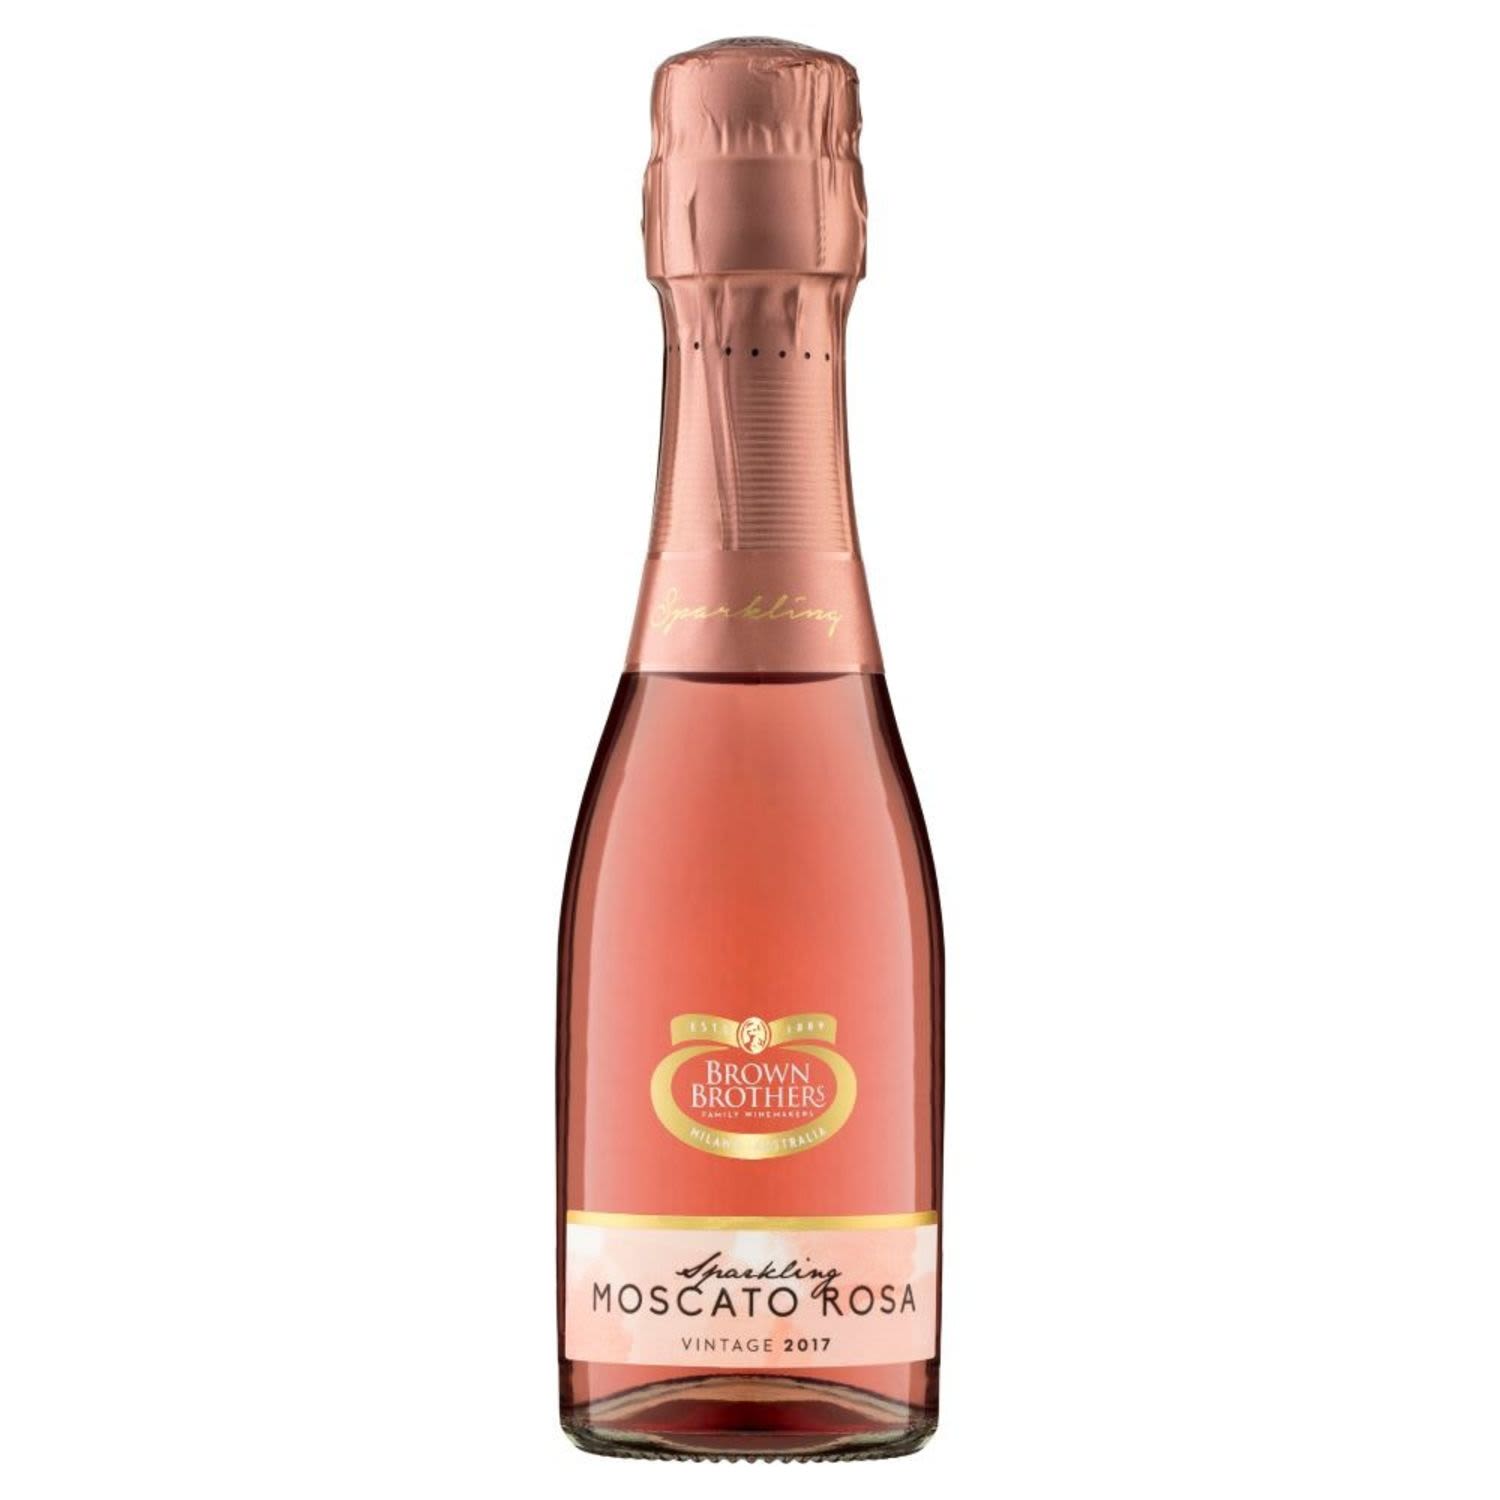 Delightfully aromatic with musk and red berry character finished with a delicate sparkle. Enjoy chilled.<br /> <br />Alcohol Volume: 7.00%<br /><br />Pack Format: Bottle<br /><br />Standard Drinks: 1.1</br /><br />Pack Type: Bottle<br /><br />Country of Origin: Australia<br /><br />Region: South Eastern Australia<br /><br />Vintage: Vintages Vary<br />